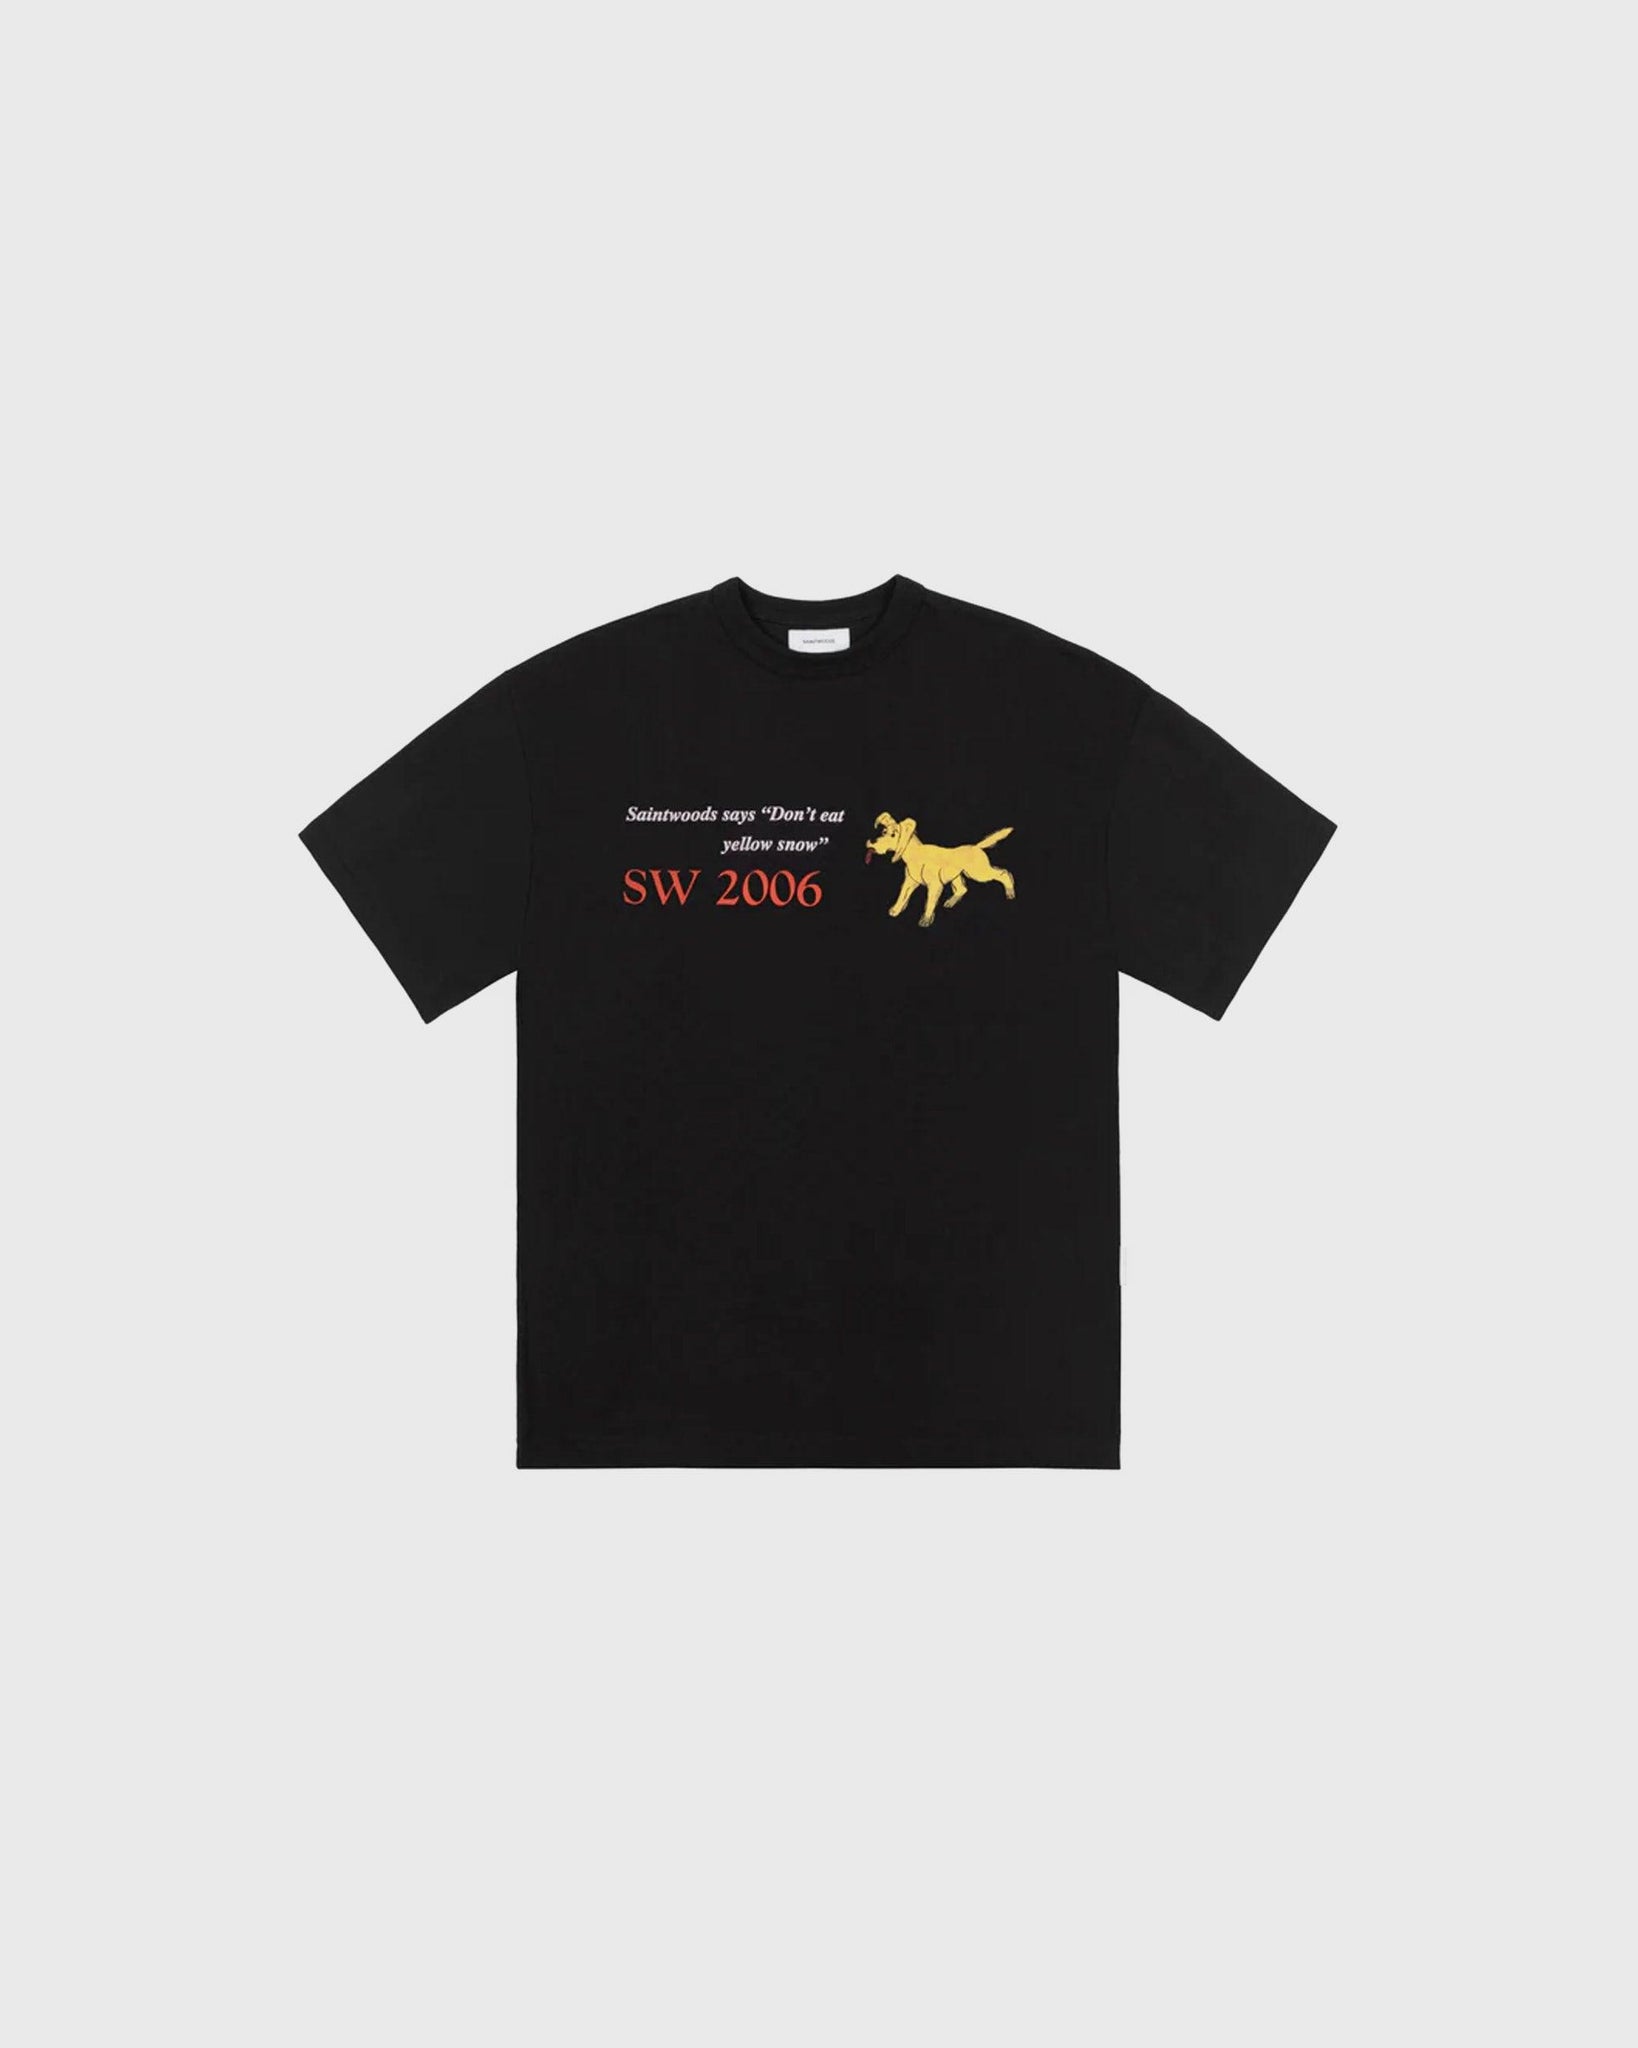 Yellow Snow Tee Black - {{ collection.title }} - Chinatown Country Club 